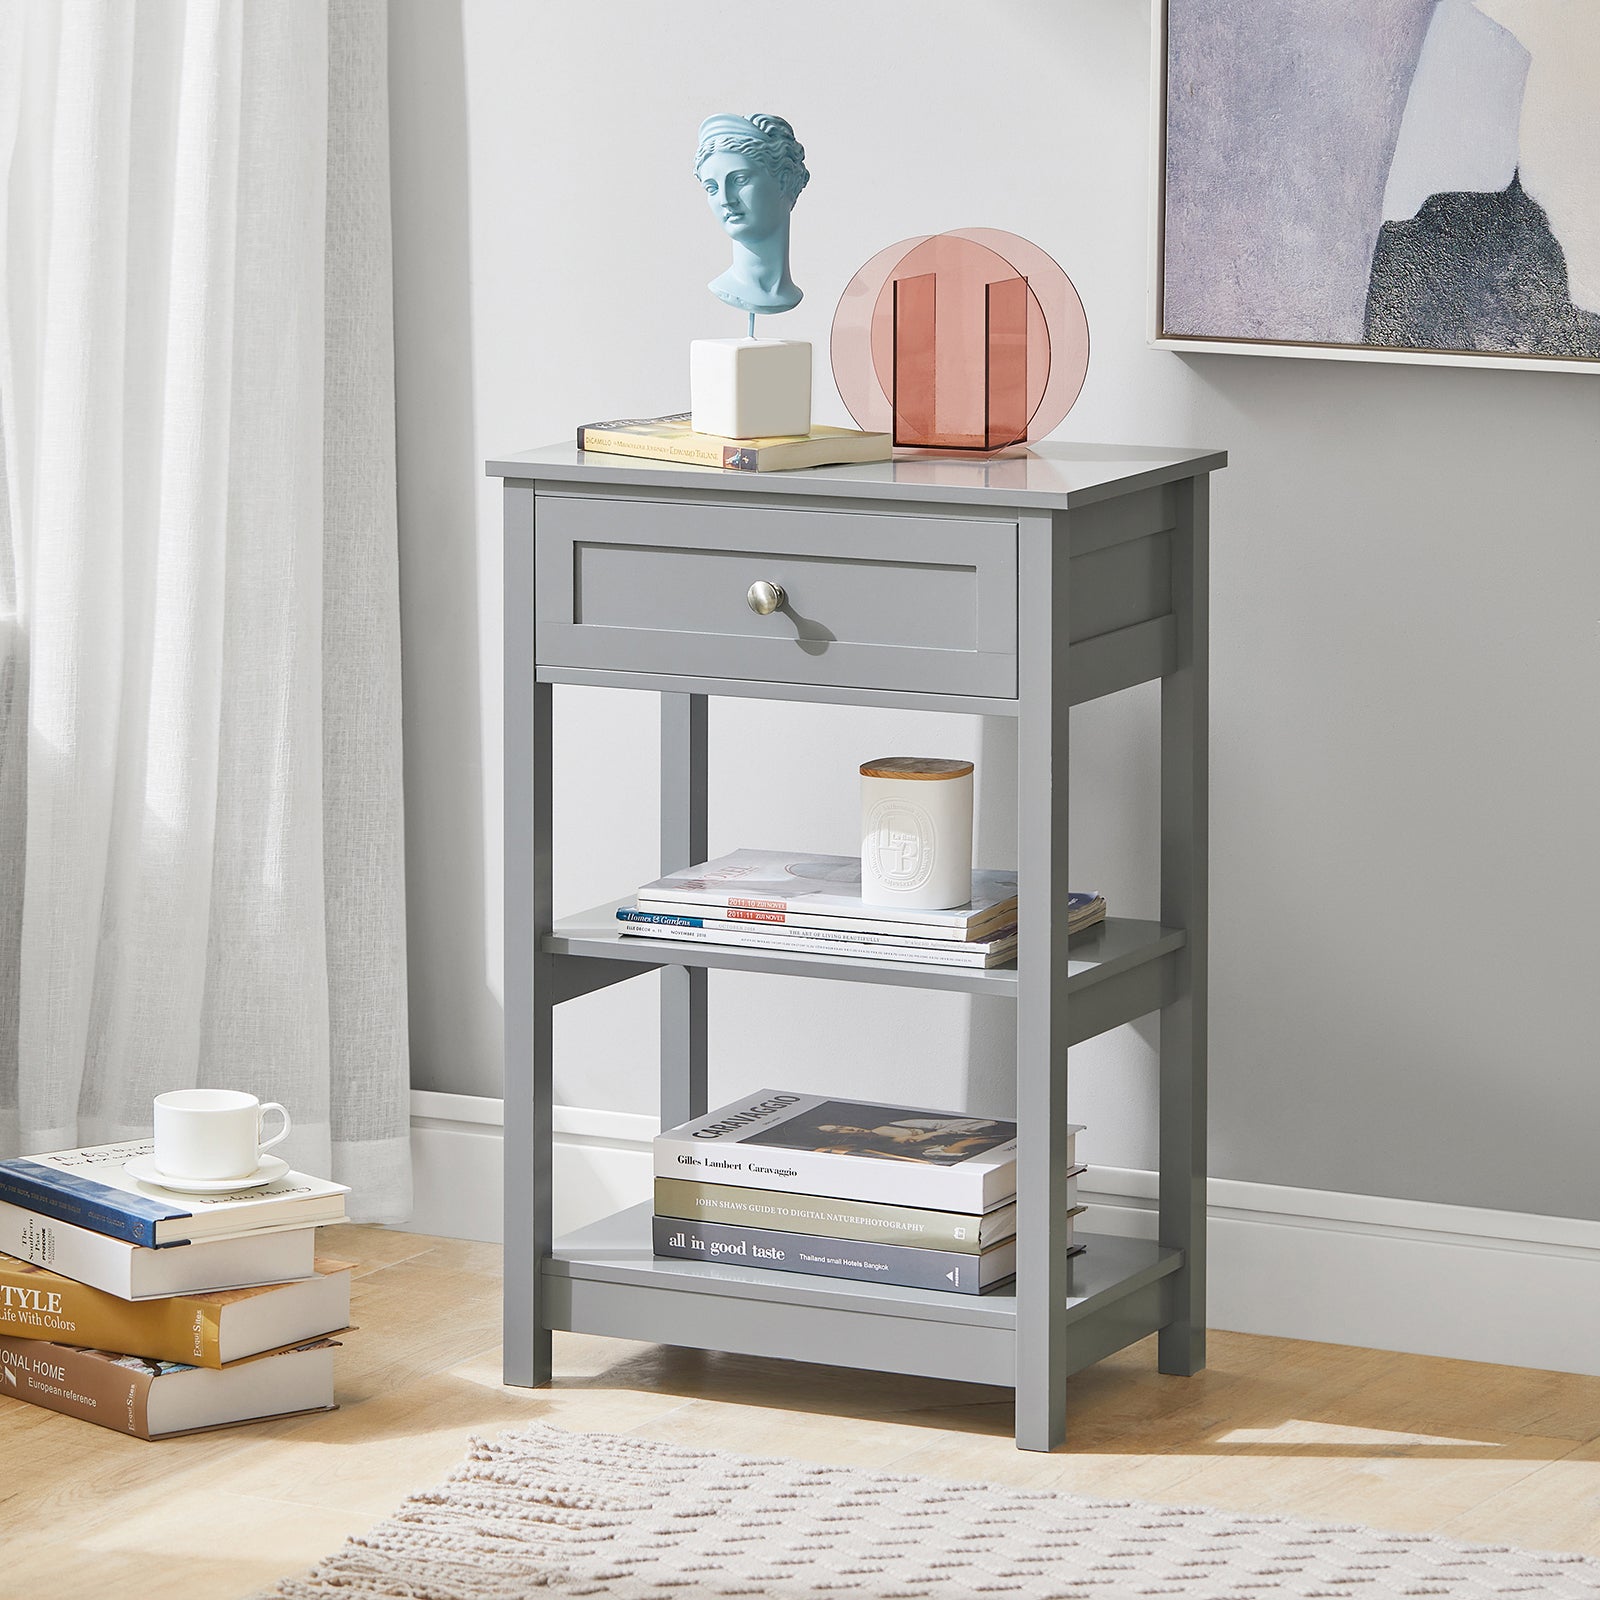 SoBuy FBT46-HG,Beside Table with 1 Drawer 2 Shelves,End Table Lamp Table Side Table Night Stand, Grey